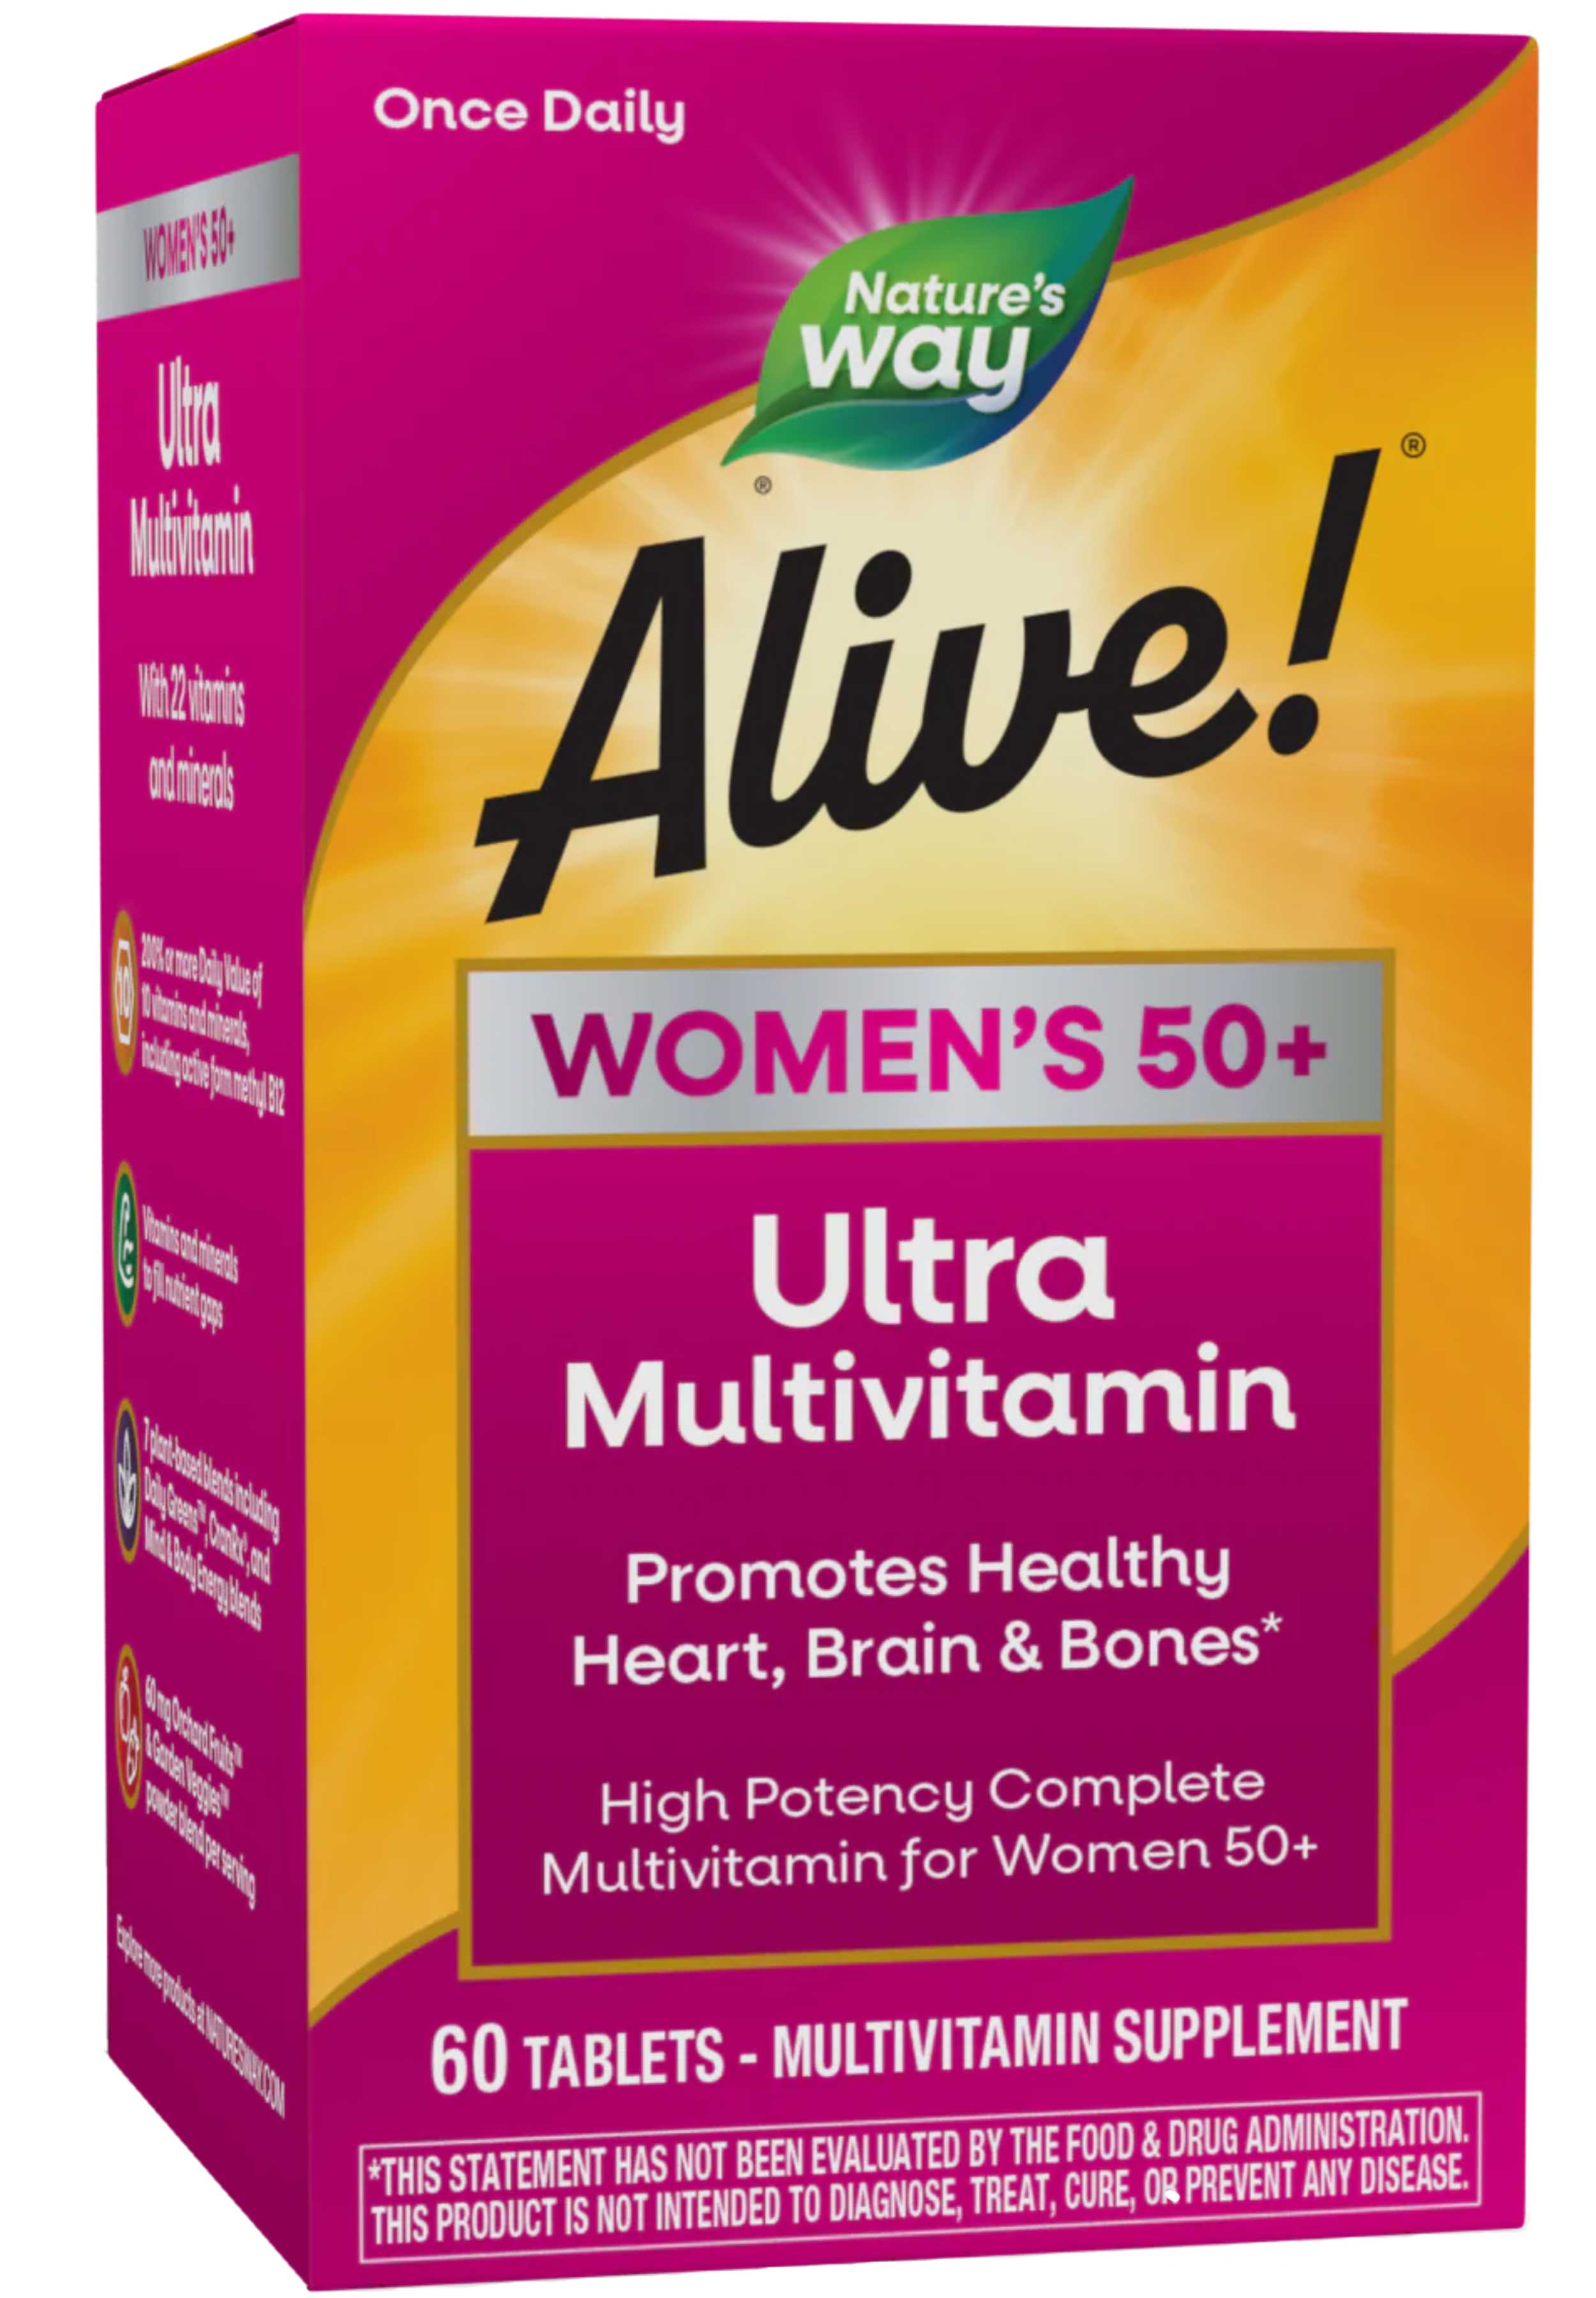 Nature's Way Alive! Women's 50+ Ultra Multivitamin (Formerly Ultra Potency Complete Multivitamin)